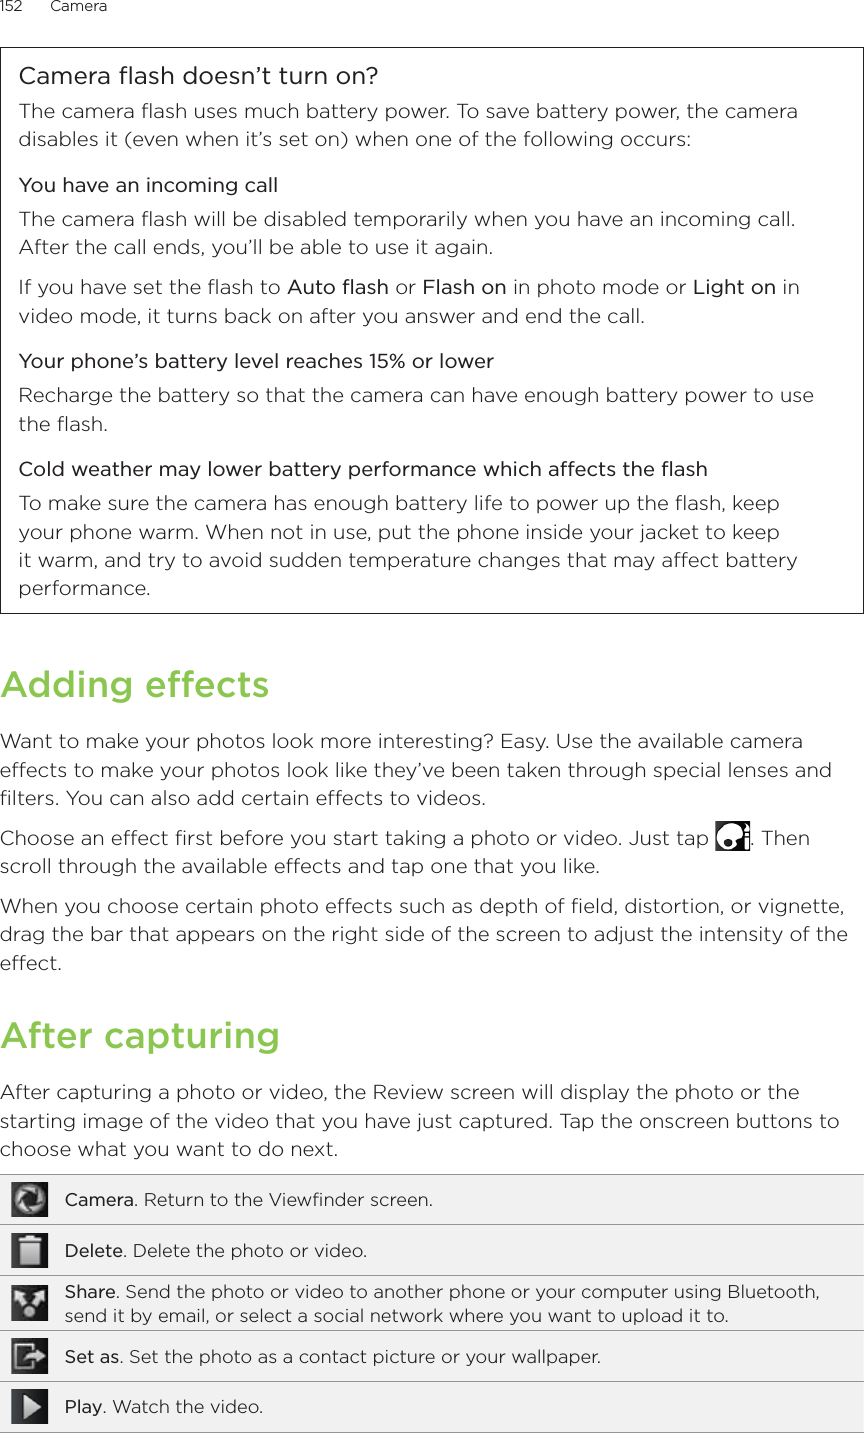 152      Camera      Camera flash doesn’t turn on?The camera flash uses much battery power. To save battery power, the camera disables it (even when it’s set on) when one of the following occurs:You have an incoming callThe camera flash will be disabled temporarily when you have an incoming call. After the call ends, you’ll be able to use it again.If you have set the flash to Auto flash or Flash on in photo mode or Light on in video mode, it turns back on after you answer and end the call.Your phone’s battery level reaches 15% or lowerRecharge the battery so that the camera can have enough battery power to use the flash.Cold weather may lower battery performance which affects the flashTo make sure the camera has enough battery life to power up the flash, keep your phone warm. When not in use, put the phone inside your jacket to keep it warm, and try to avoid sudden temperature changes that may affect battery performance.Adding effectsWant to make your photos look more interesting? Easy. Use the available camera effects to make your photos look like they’ve been taken through special lenses and filters. You can also add certain effects to videos.Choose an effect first before you start taking a photo or video. Just tap  . Then scroll through the available effects and tap one that you like.When you choose certain photo effects such as depth of field, distortion, or vignette, drag the bar that appears on the right side of the screen to adjust the intensity of the effect.After capturingAfter capturing a photo or video, the Review screen will display the photo or the starting image of the video that you have just captured. Tap the onscreen buttons to choose what you want to do next.Camera. Return to the Viewfinder screen.Delete. Delete the photo or video.Share. Send the photo or video to another phone or your computer using Bluetooth, send it by email, or select a social network where you want to upload it to.Set as. Set the photo as a contact picture or your wallpaper.Play. Watch the video.